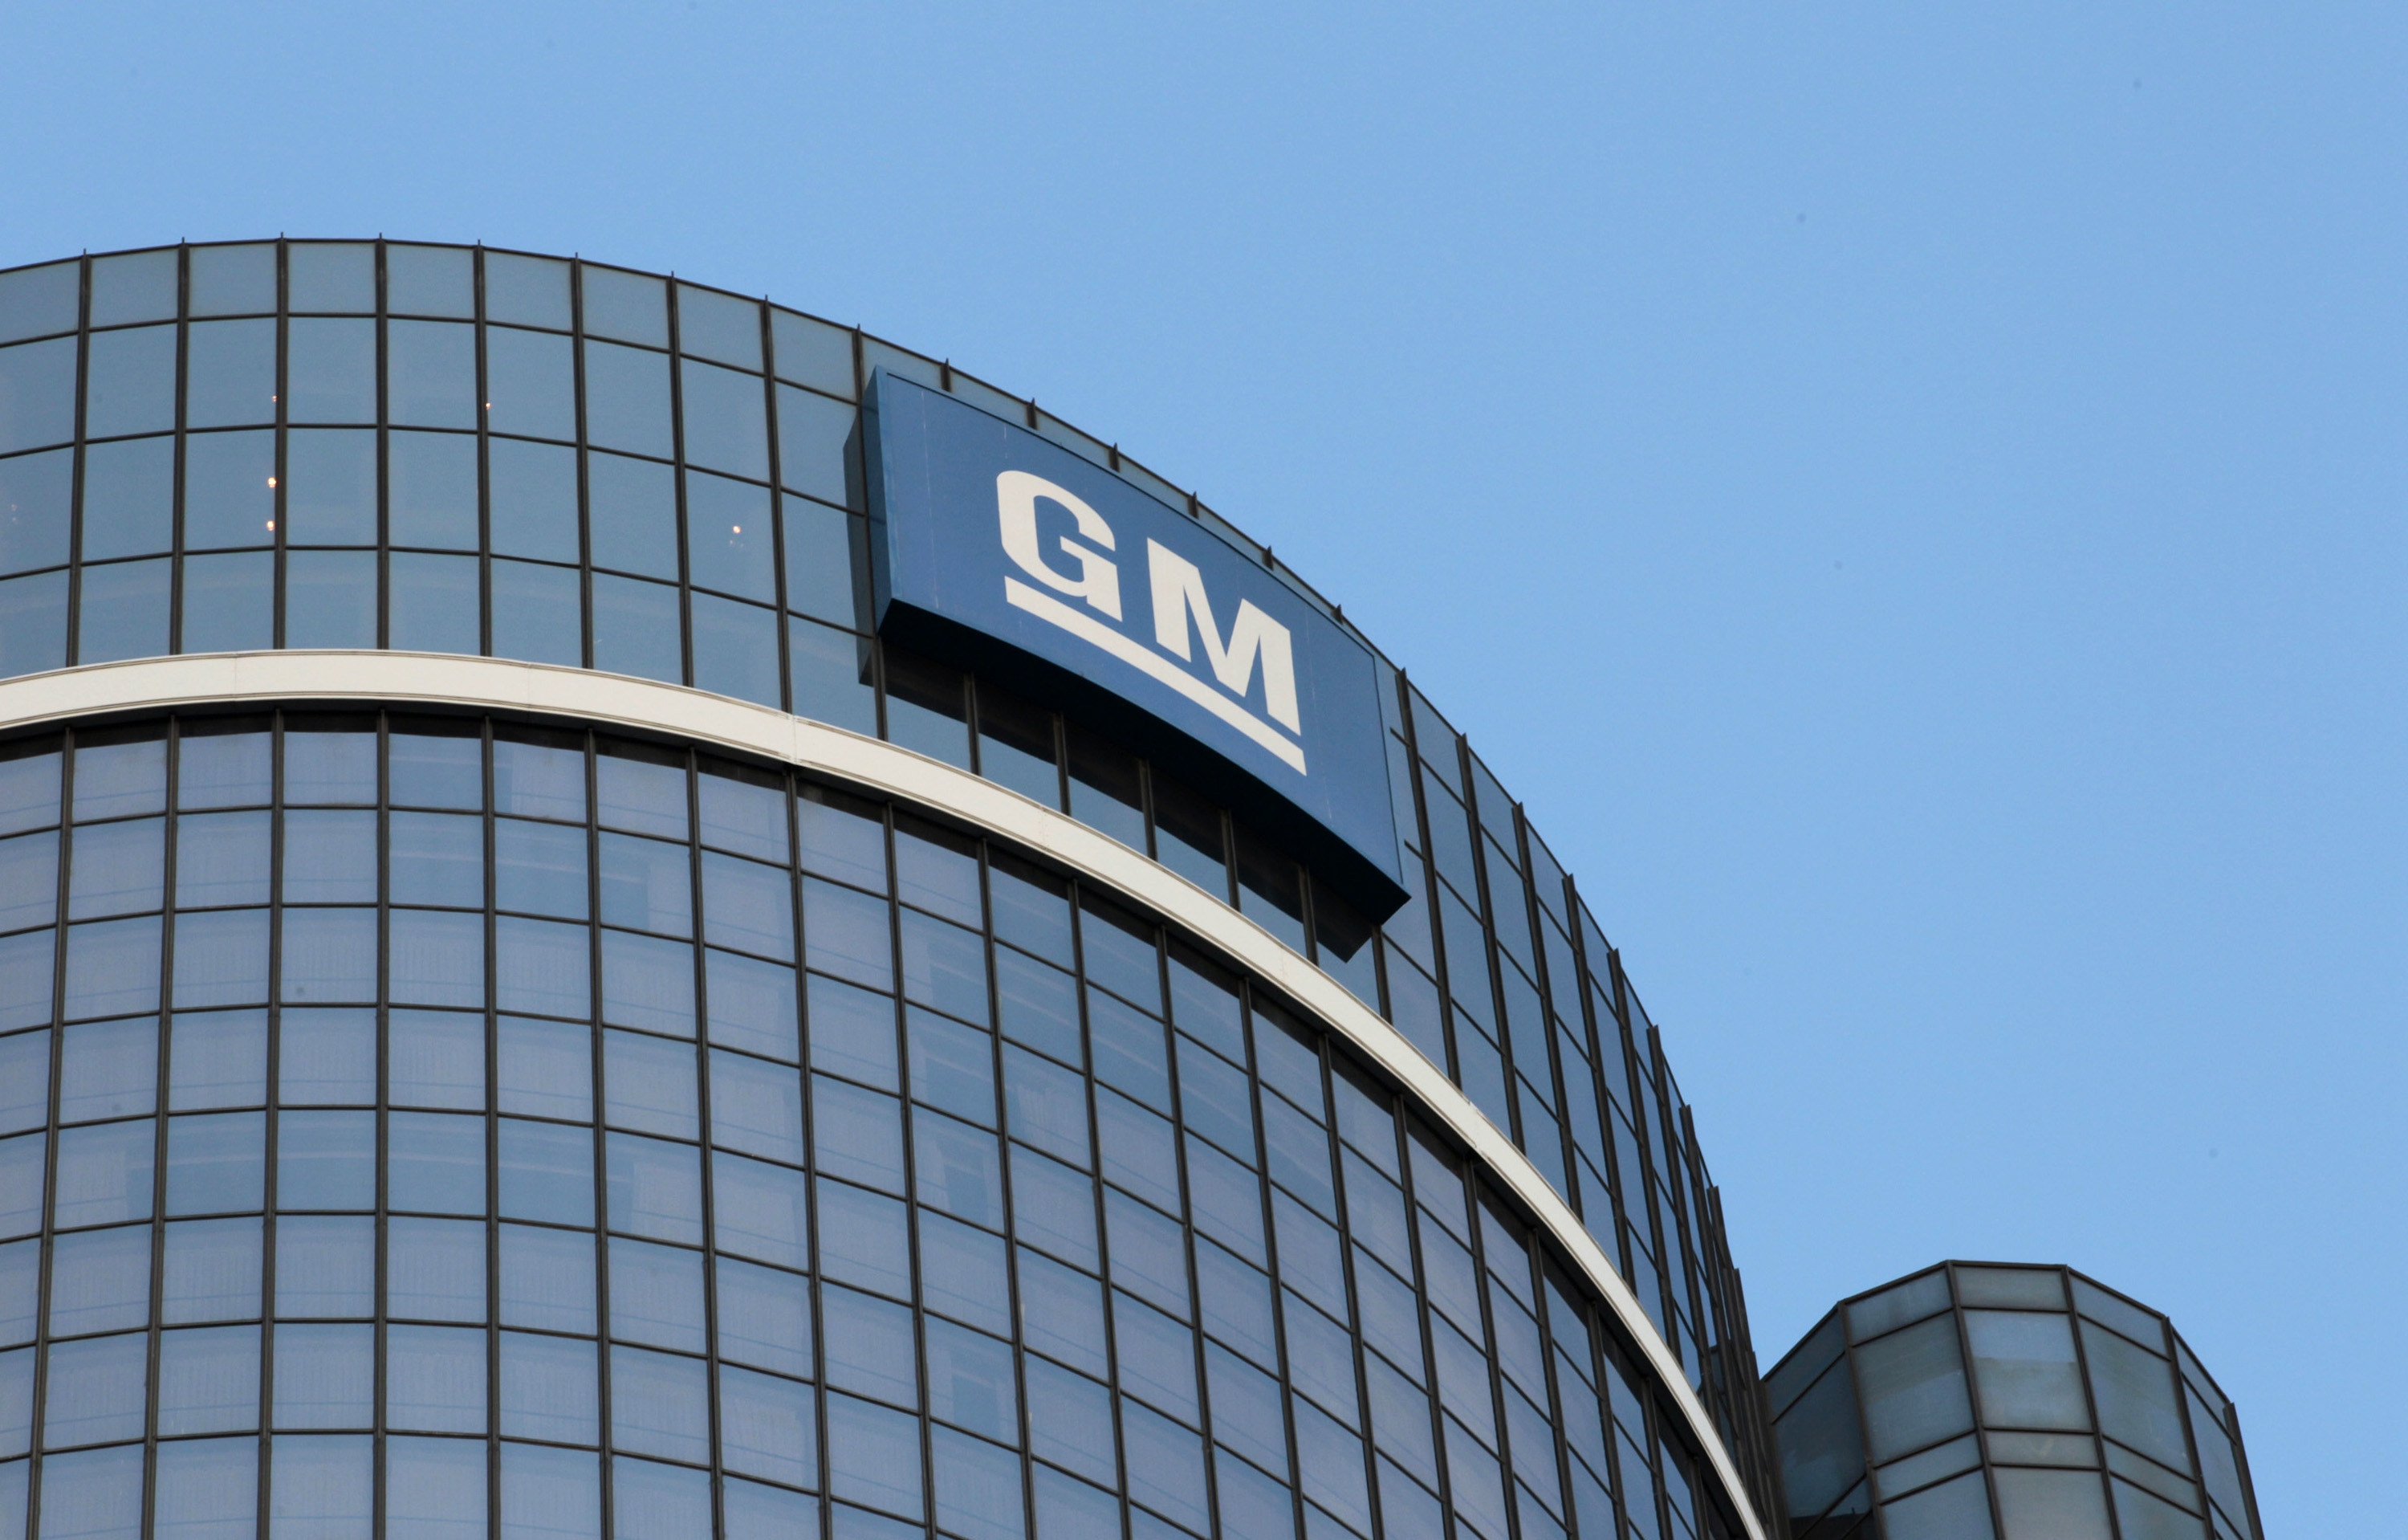 General Motors and Marcus by Goldman Sachs collaborate on new